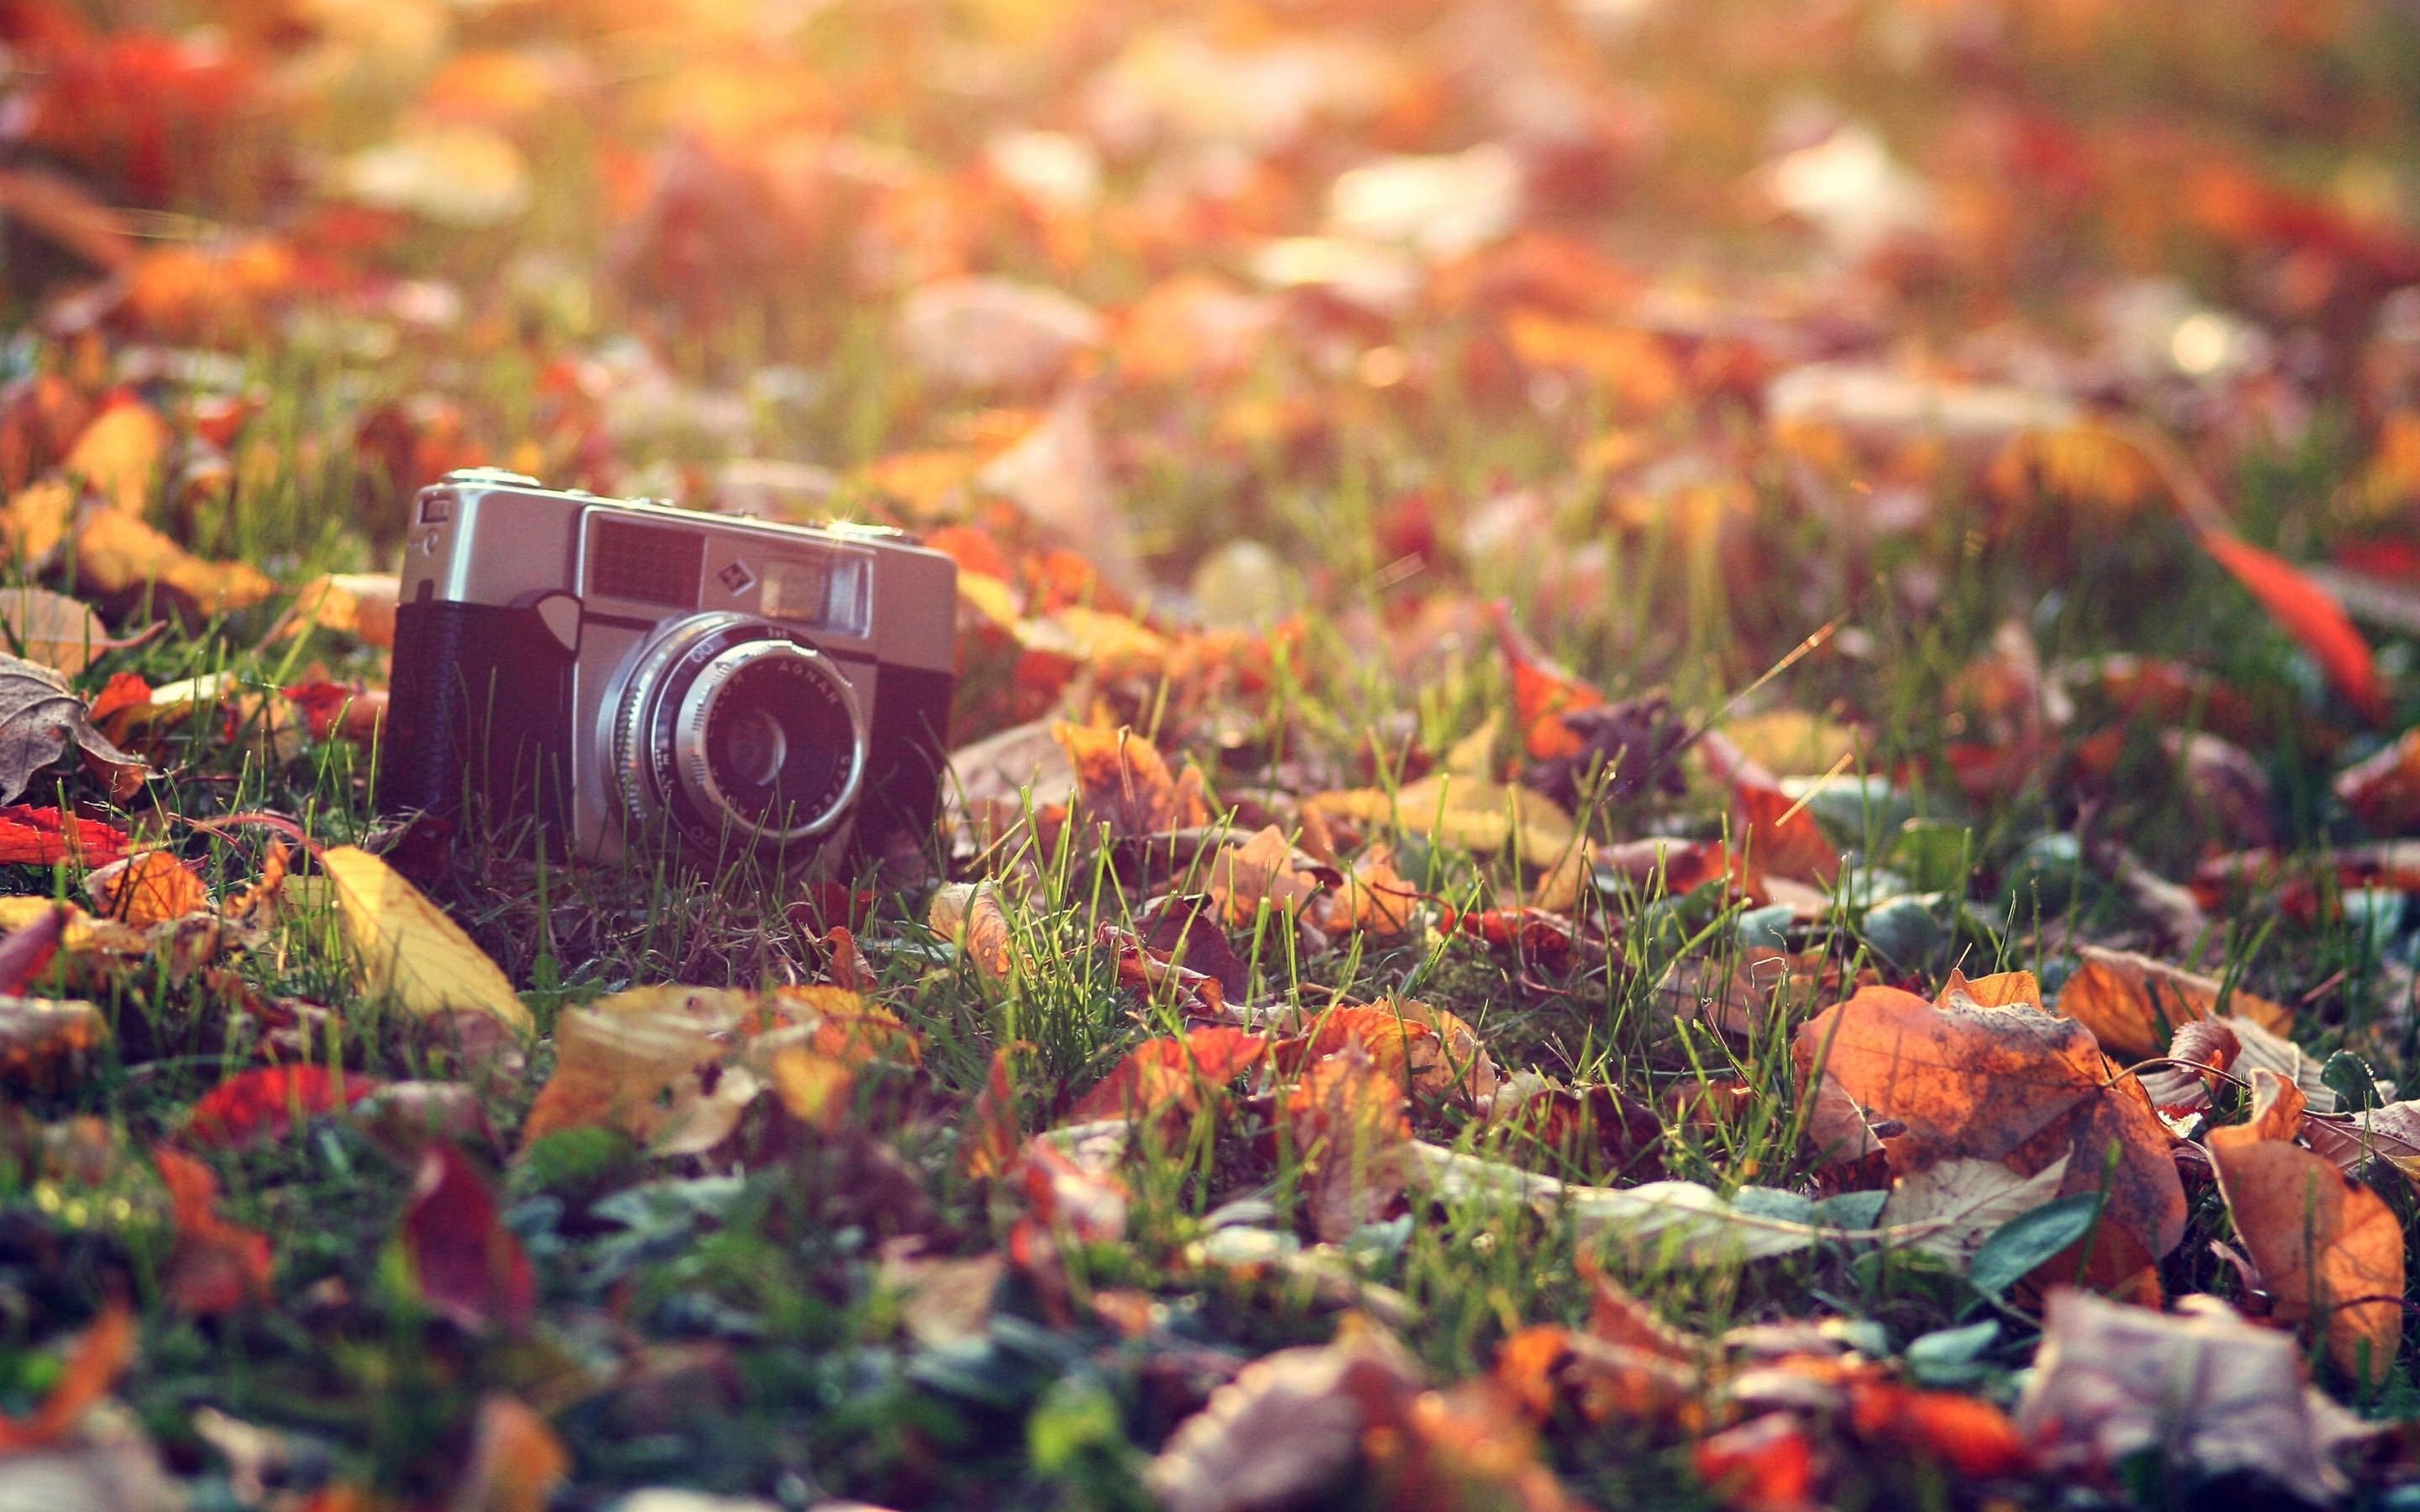 30 Autumn Collage Wallpapers  Pretty Fall Collage for Phone  Idea  Wallpapers  iPhone WallpapersColor Schemes